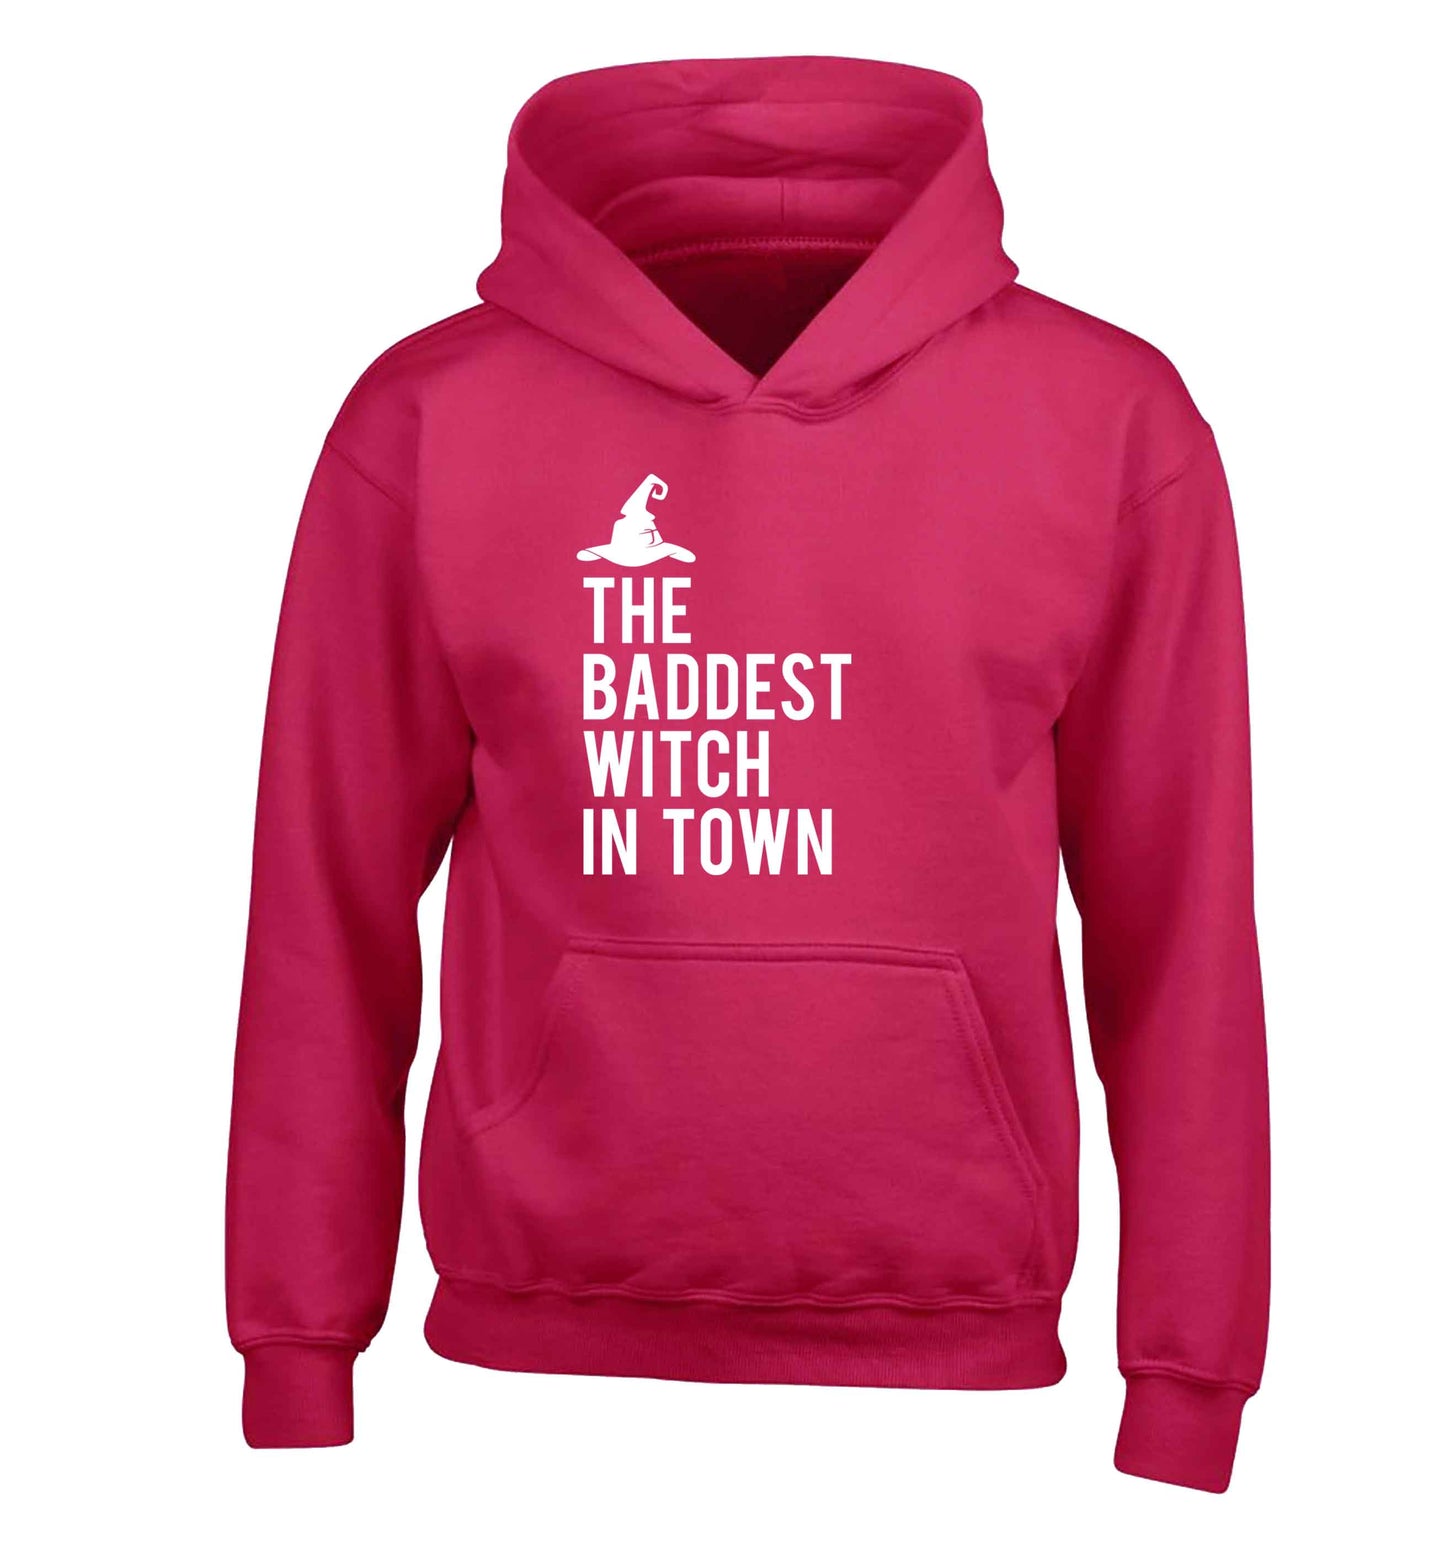 Badest witch in town children's pink hoodie 12-13 Years